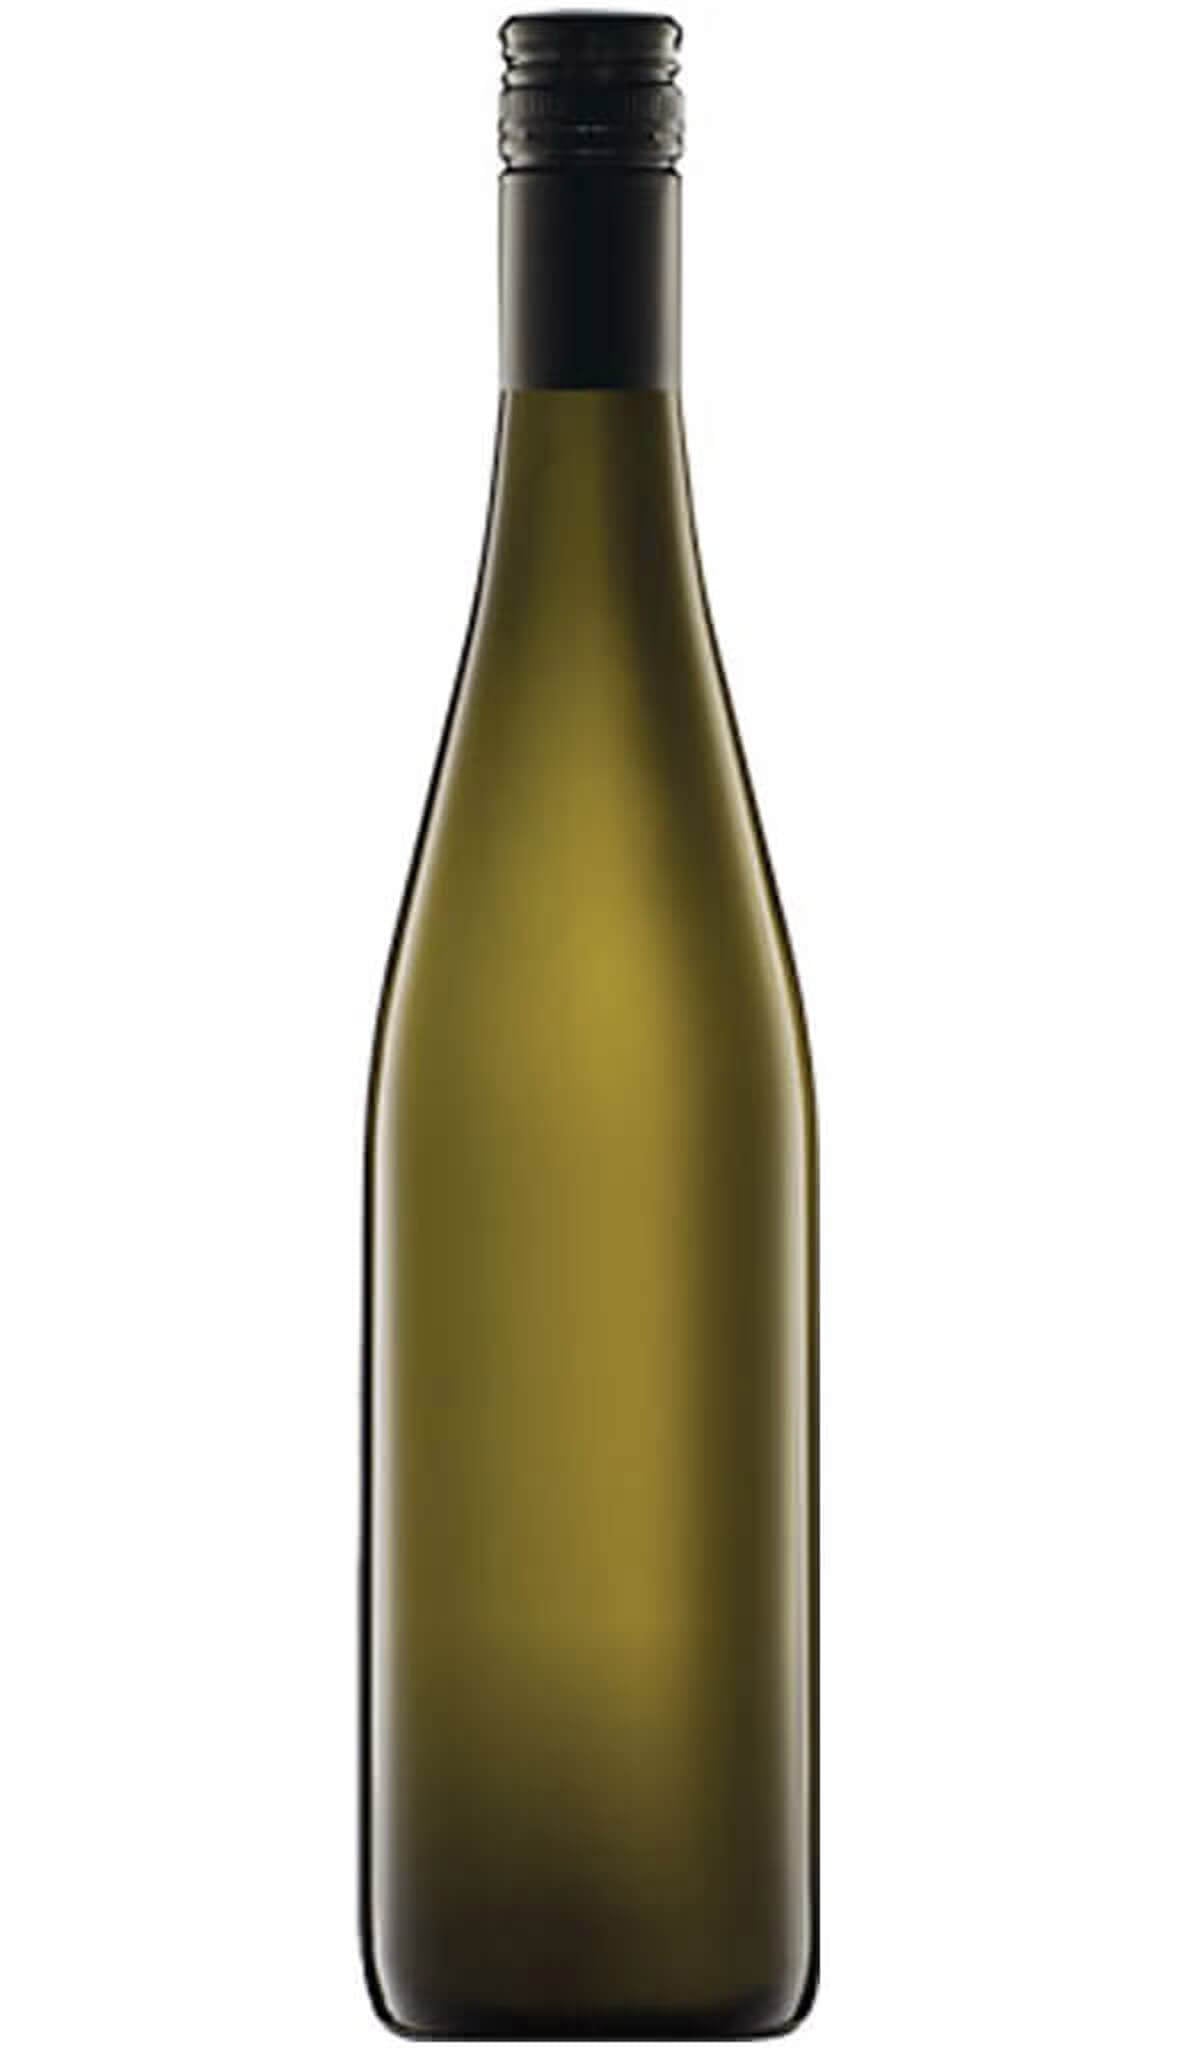 Find out more or buy Cleanskin King Valley Riesling 2023 online at Wine Sellers Direct - Australia’s independent liquor specialists.